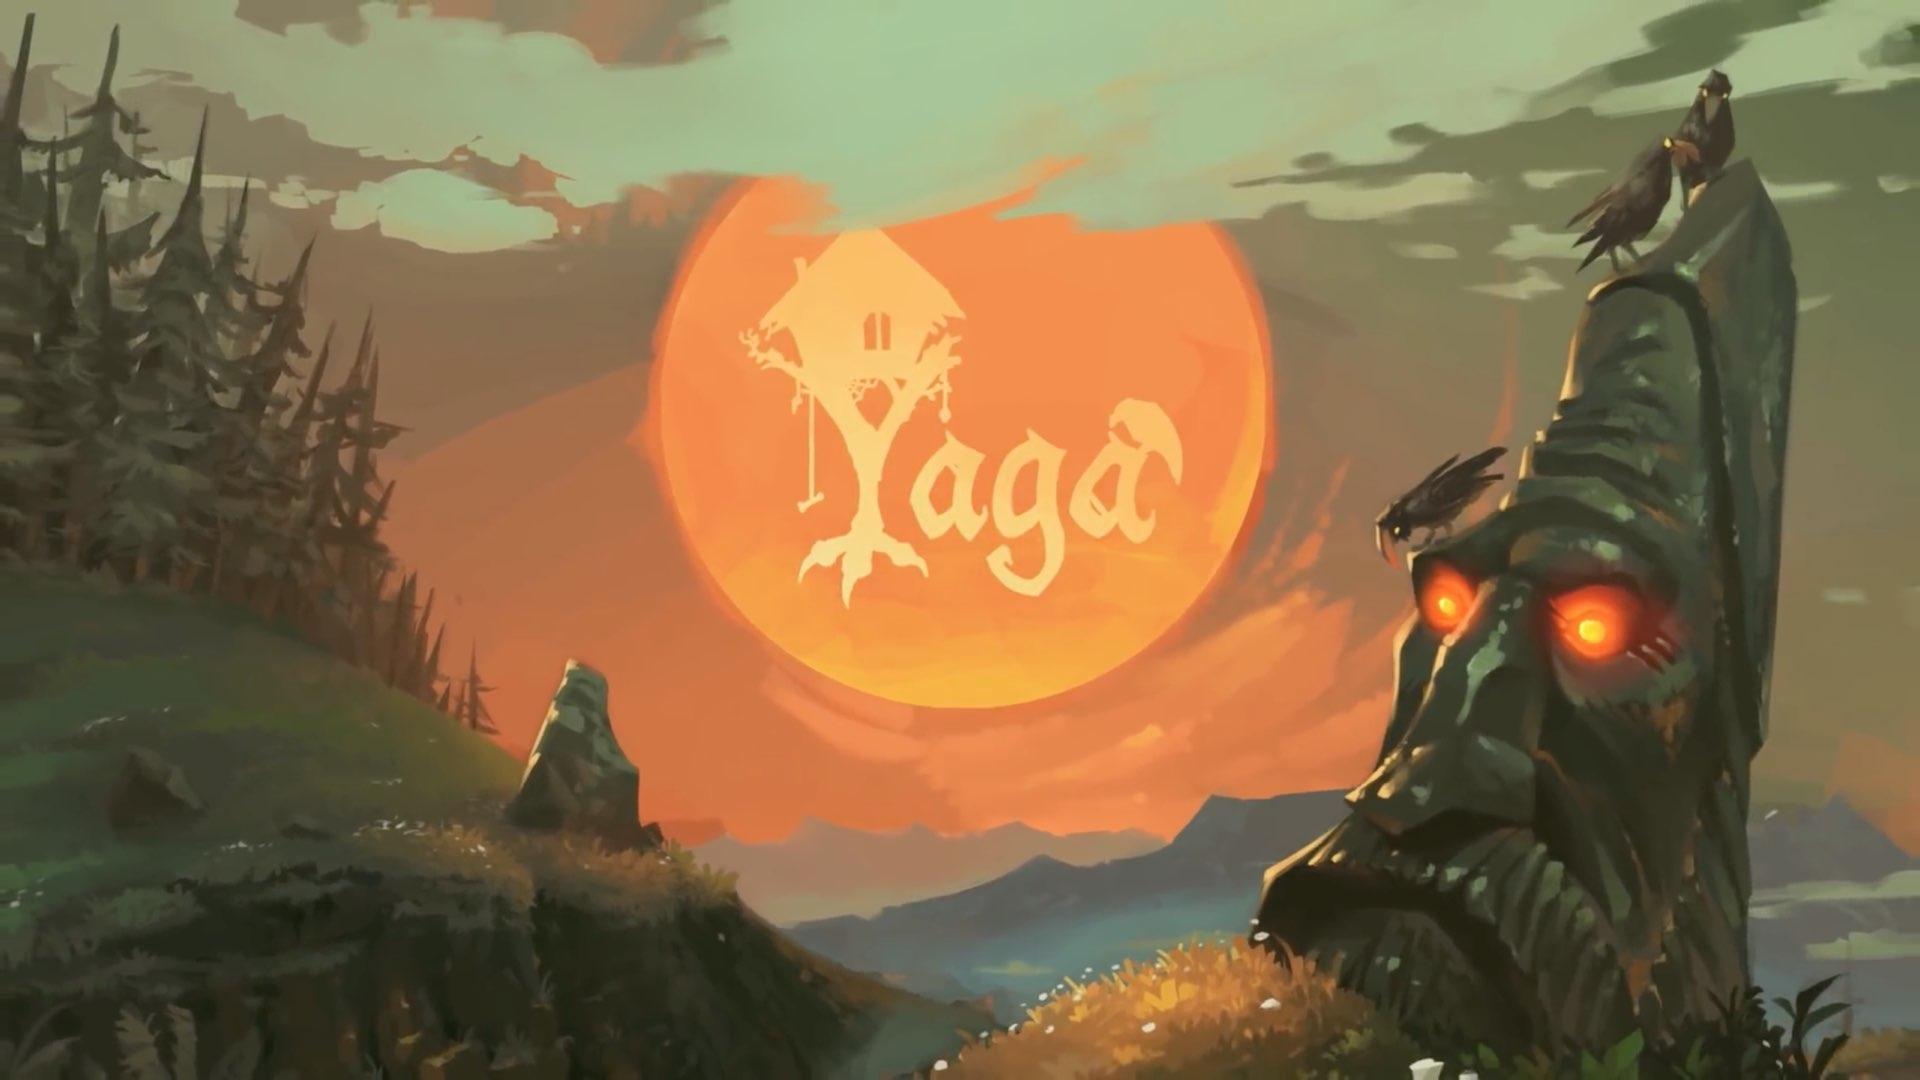 Apple Arcade shares the trailer for Yaga the Roleplaying